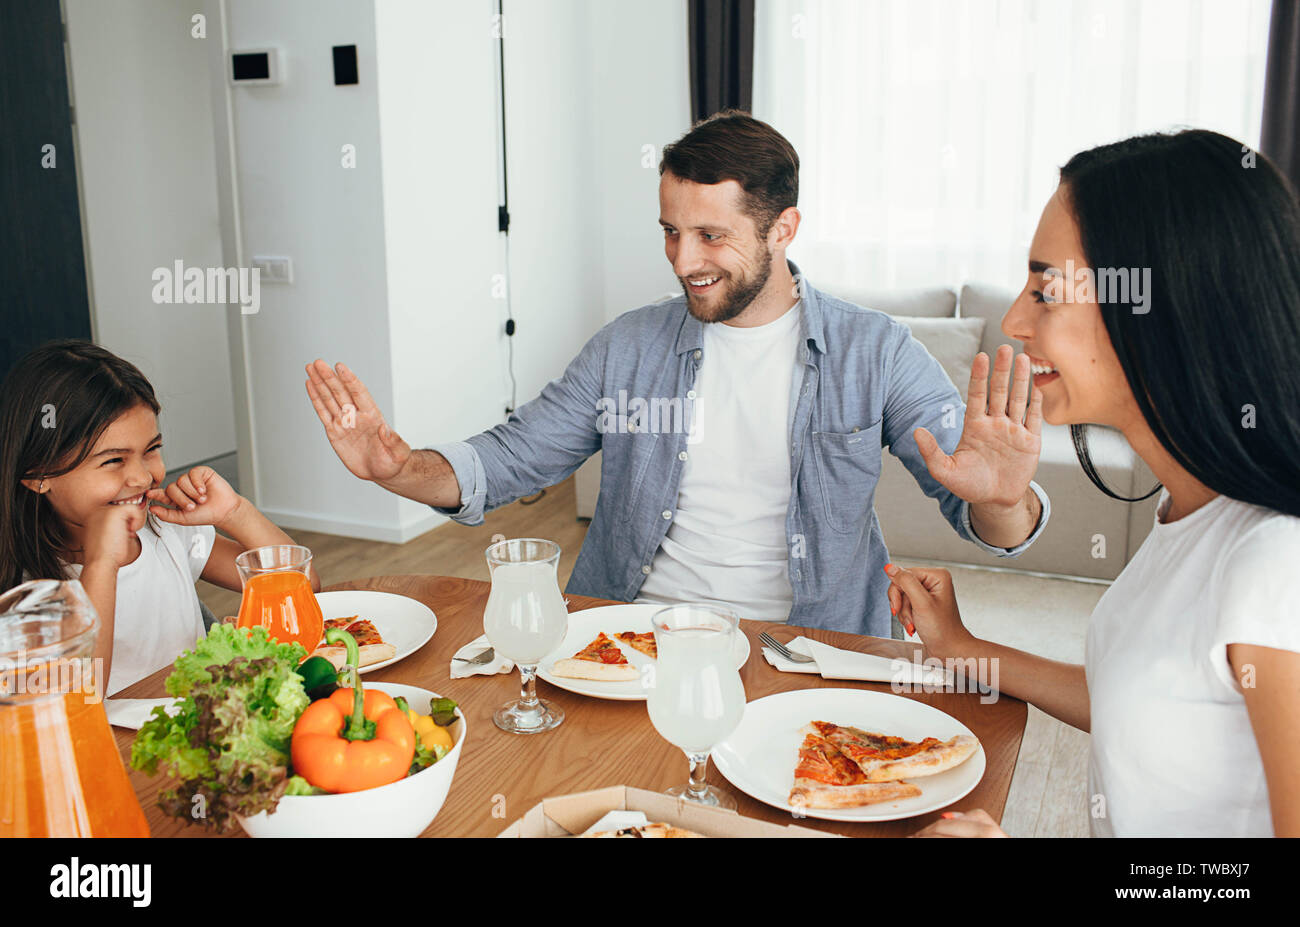 family, mother, father and daughter during dinner.Eating eating homemade pizza at home Stock Photo